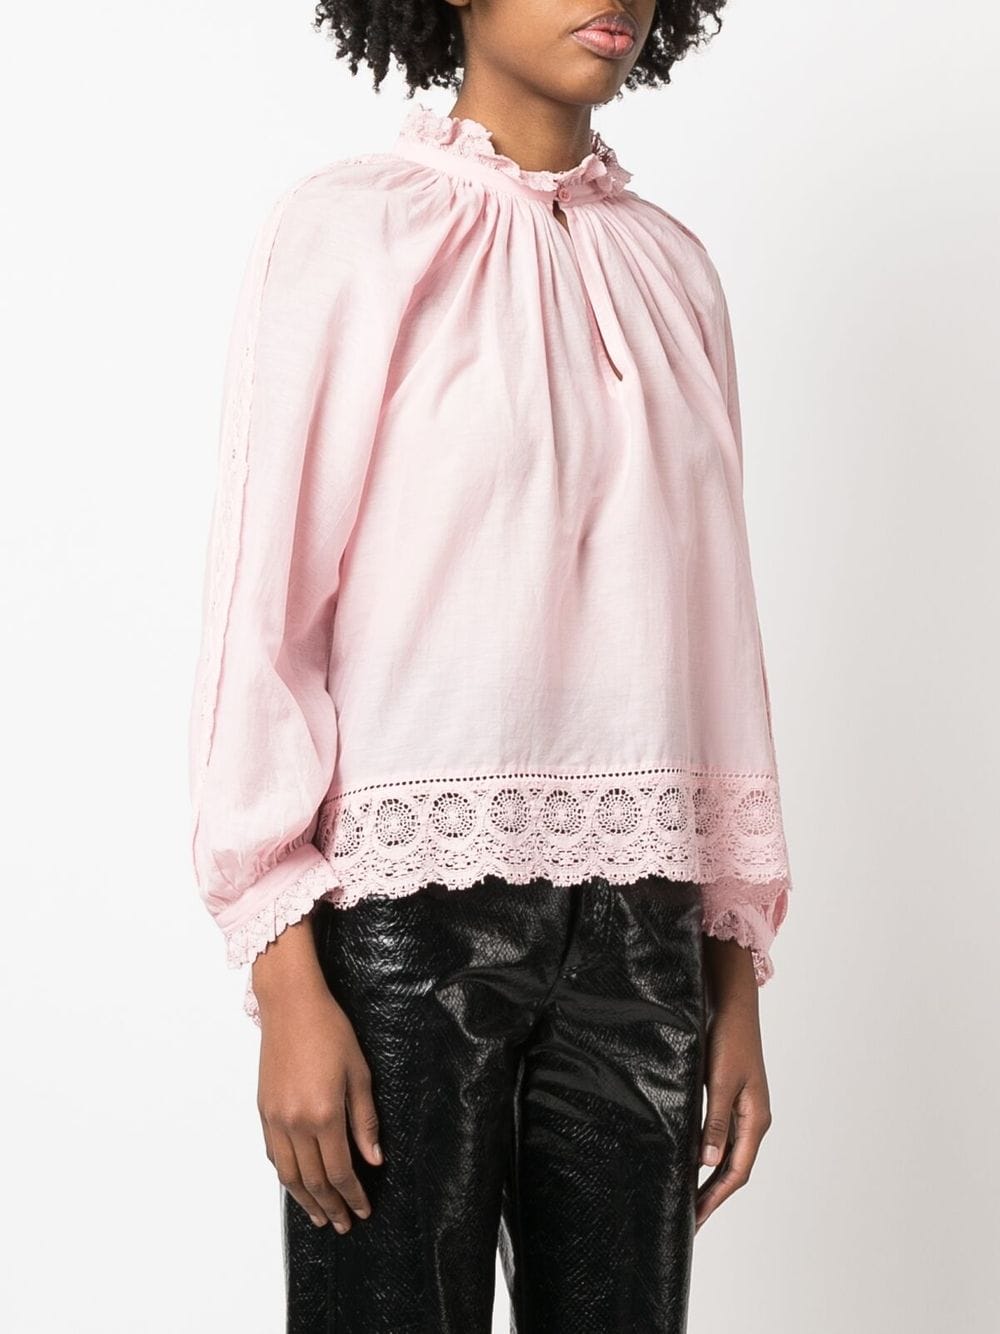 Zadig&Voltaire Theresa lace-trim Blouse - Farfetch